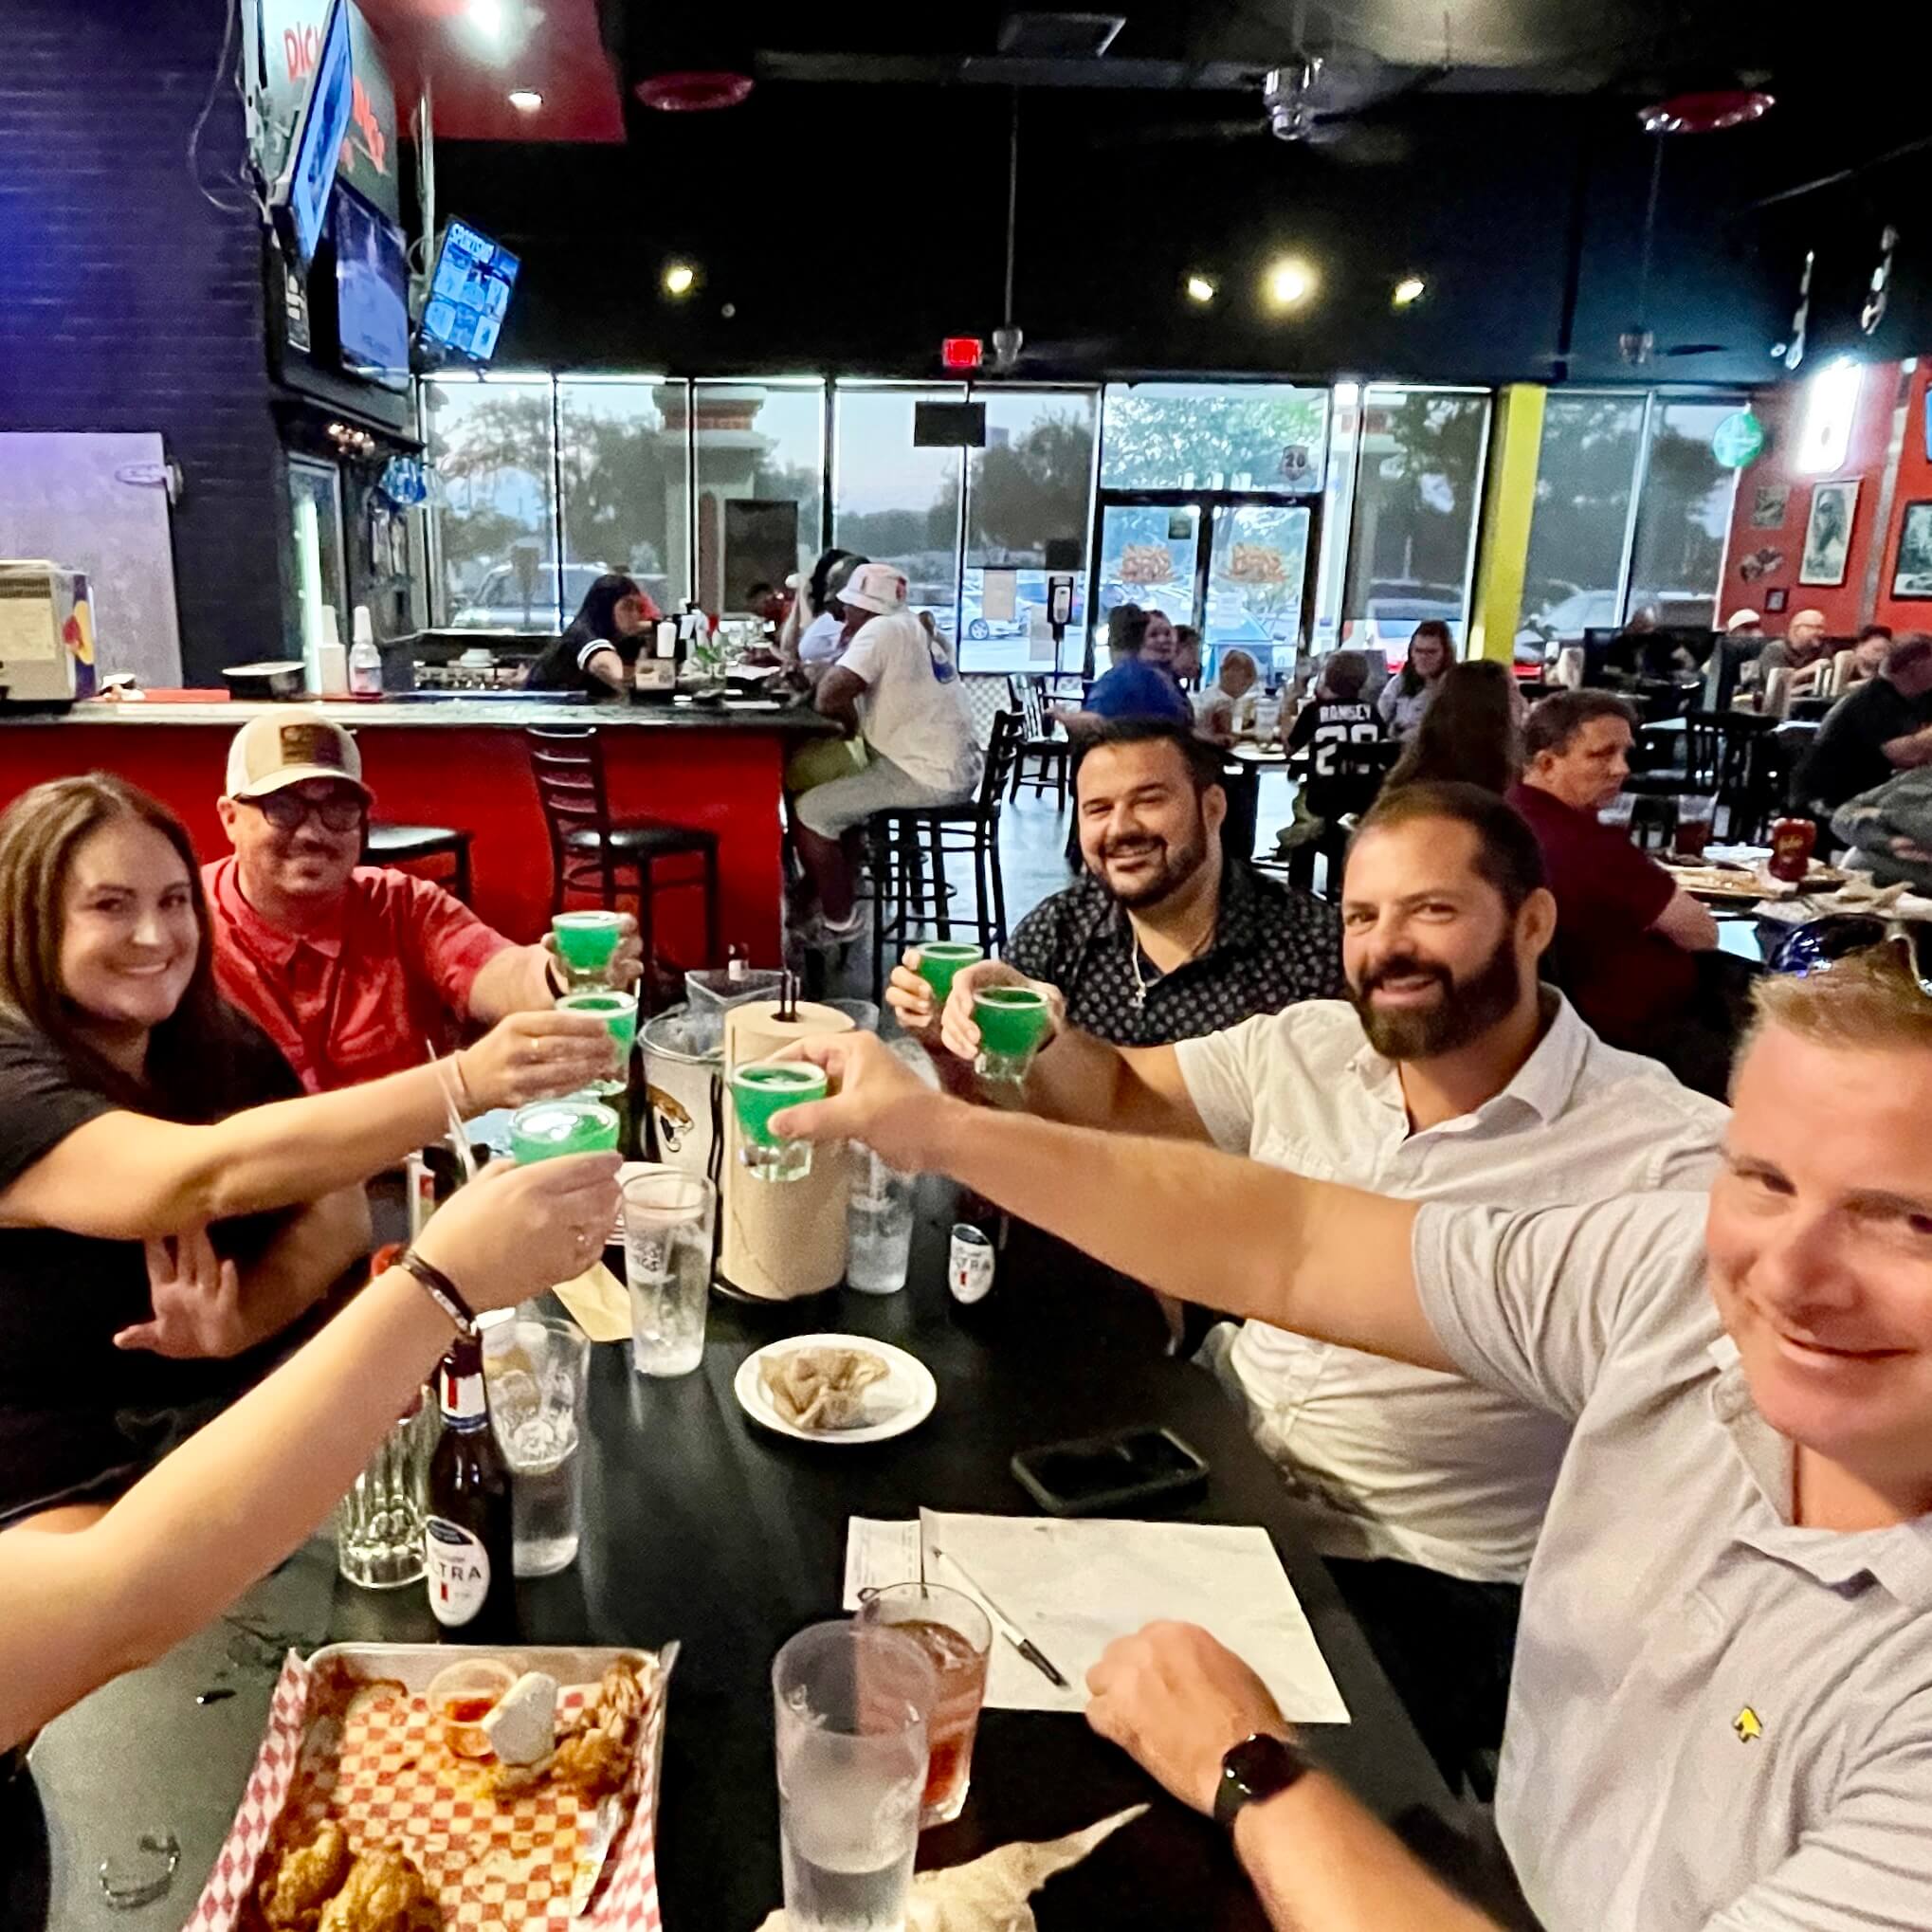 Dick's Wings and Grill Jacksonville FL 32225 trivia night 8